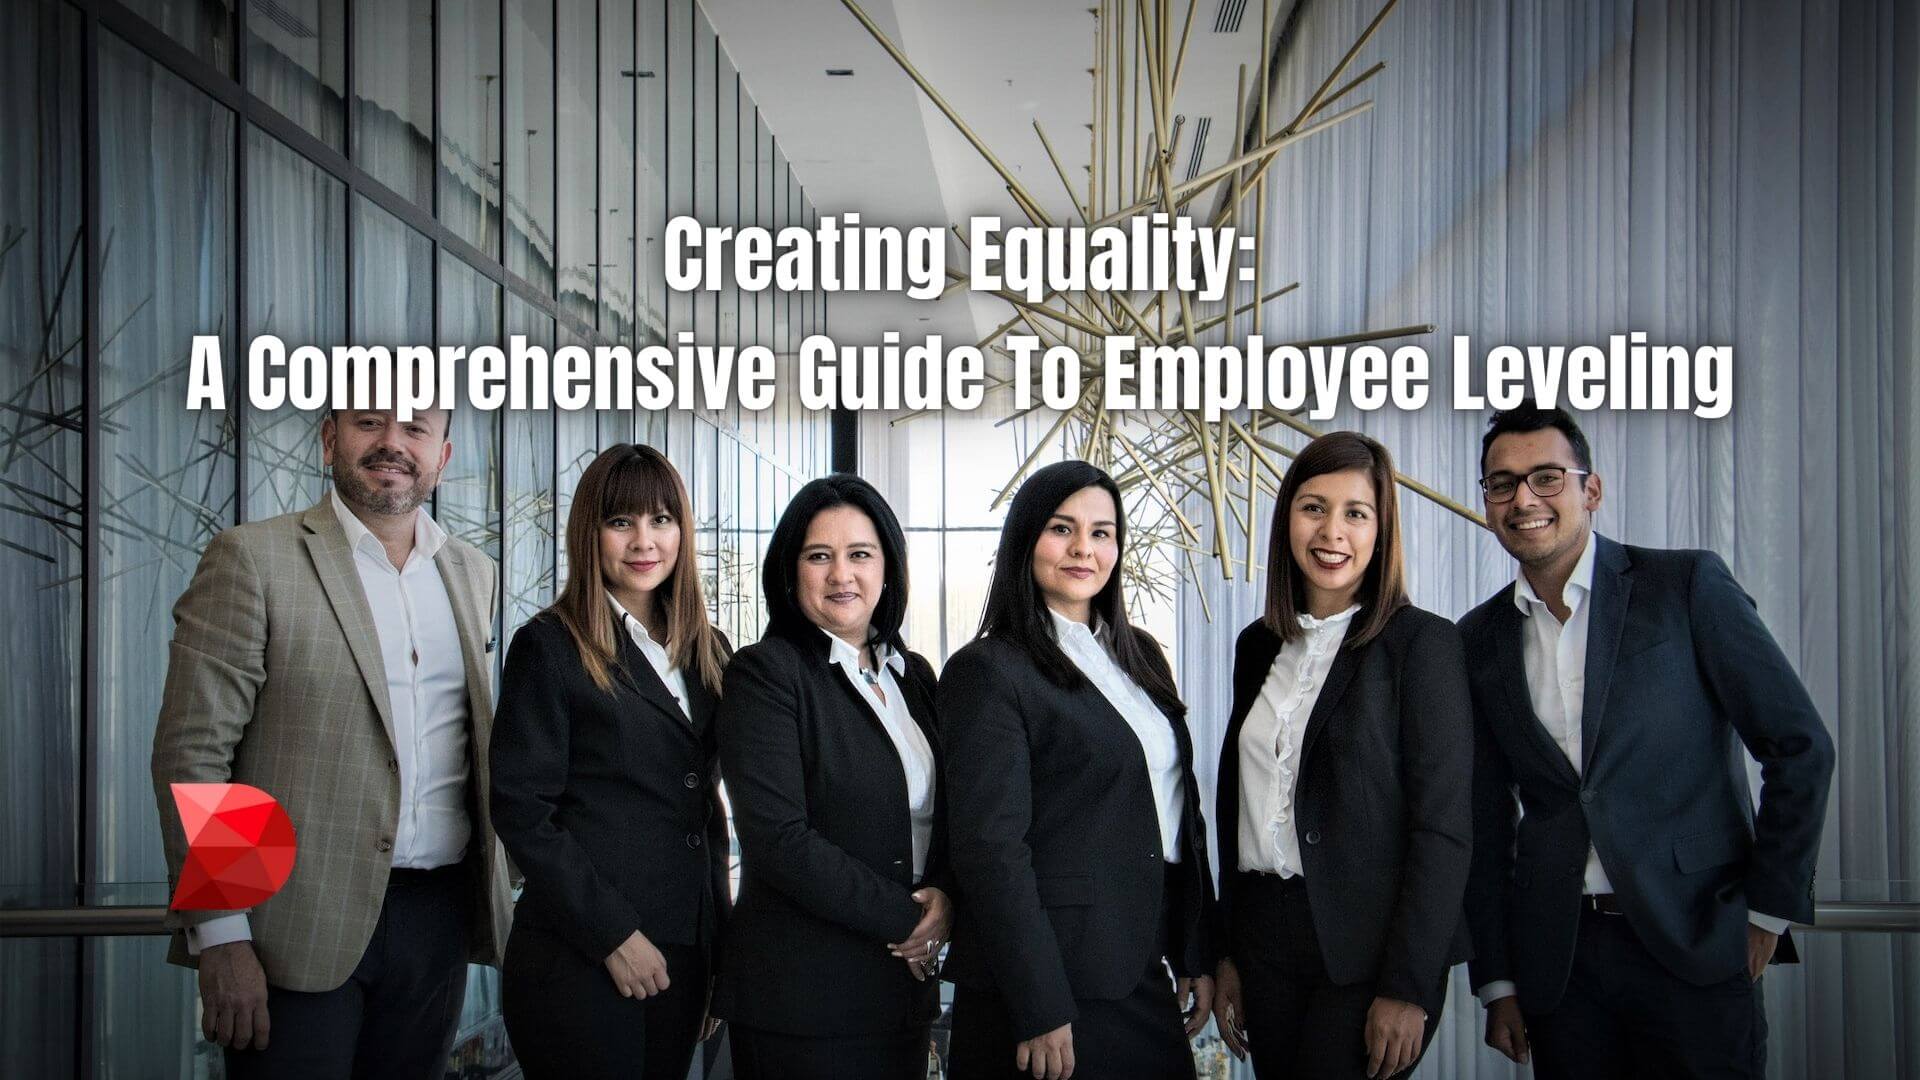 Employee leveling is a powerful tool for creating fairness and equality in the workplace. Here's why it's important and how to implement it.